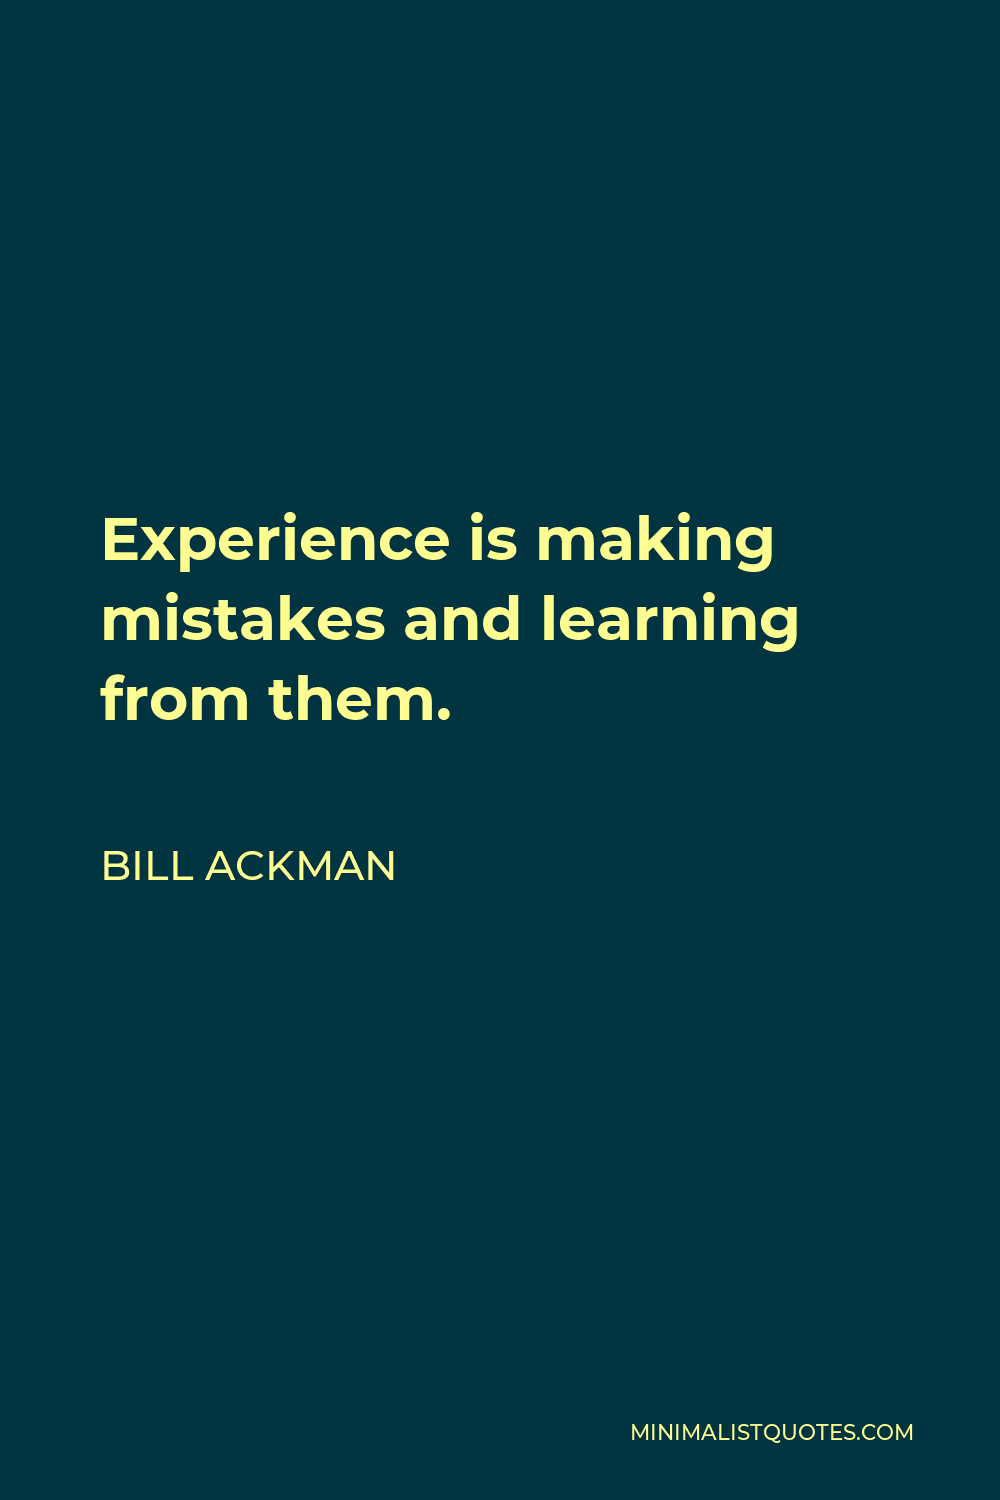 Bill Ackman Quote - Experience is making mistakes and learning from them.